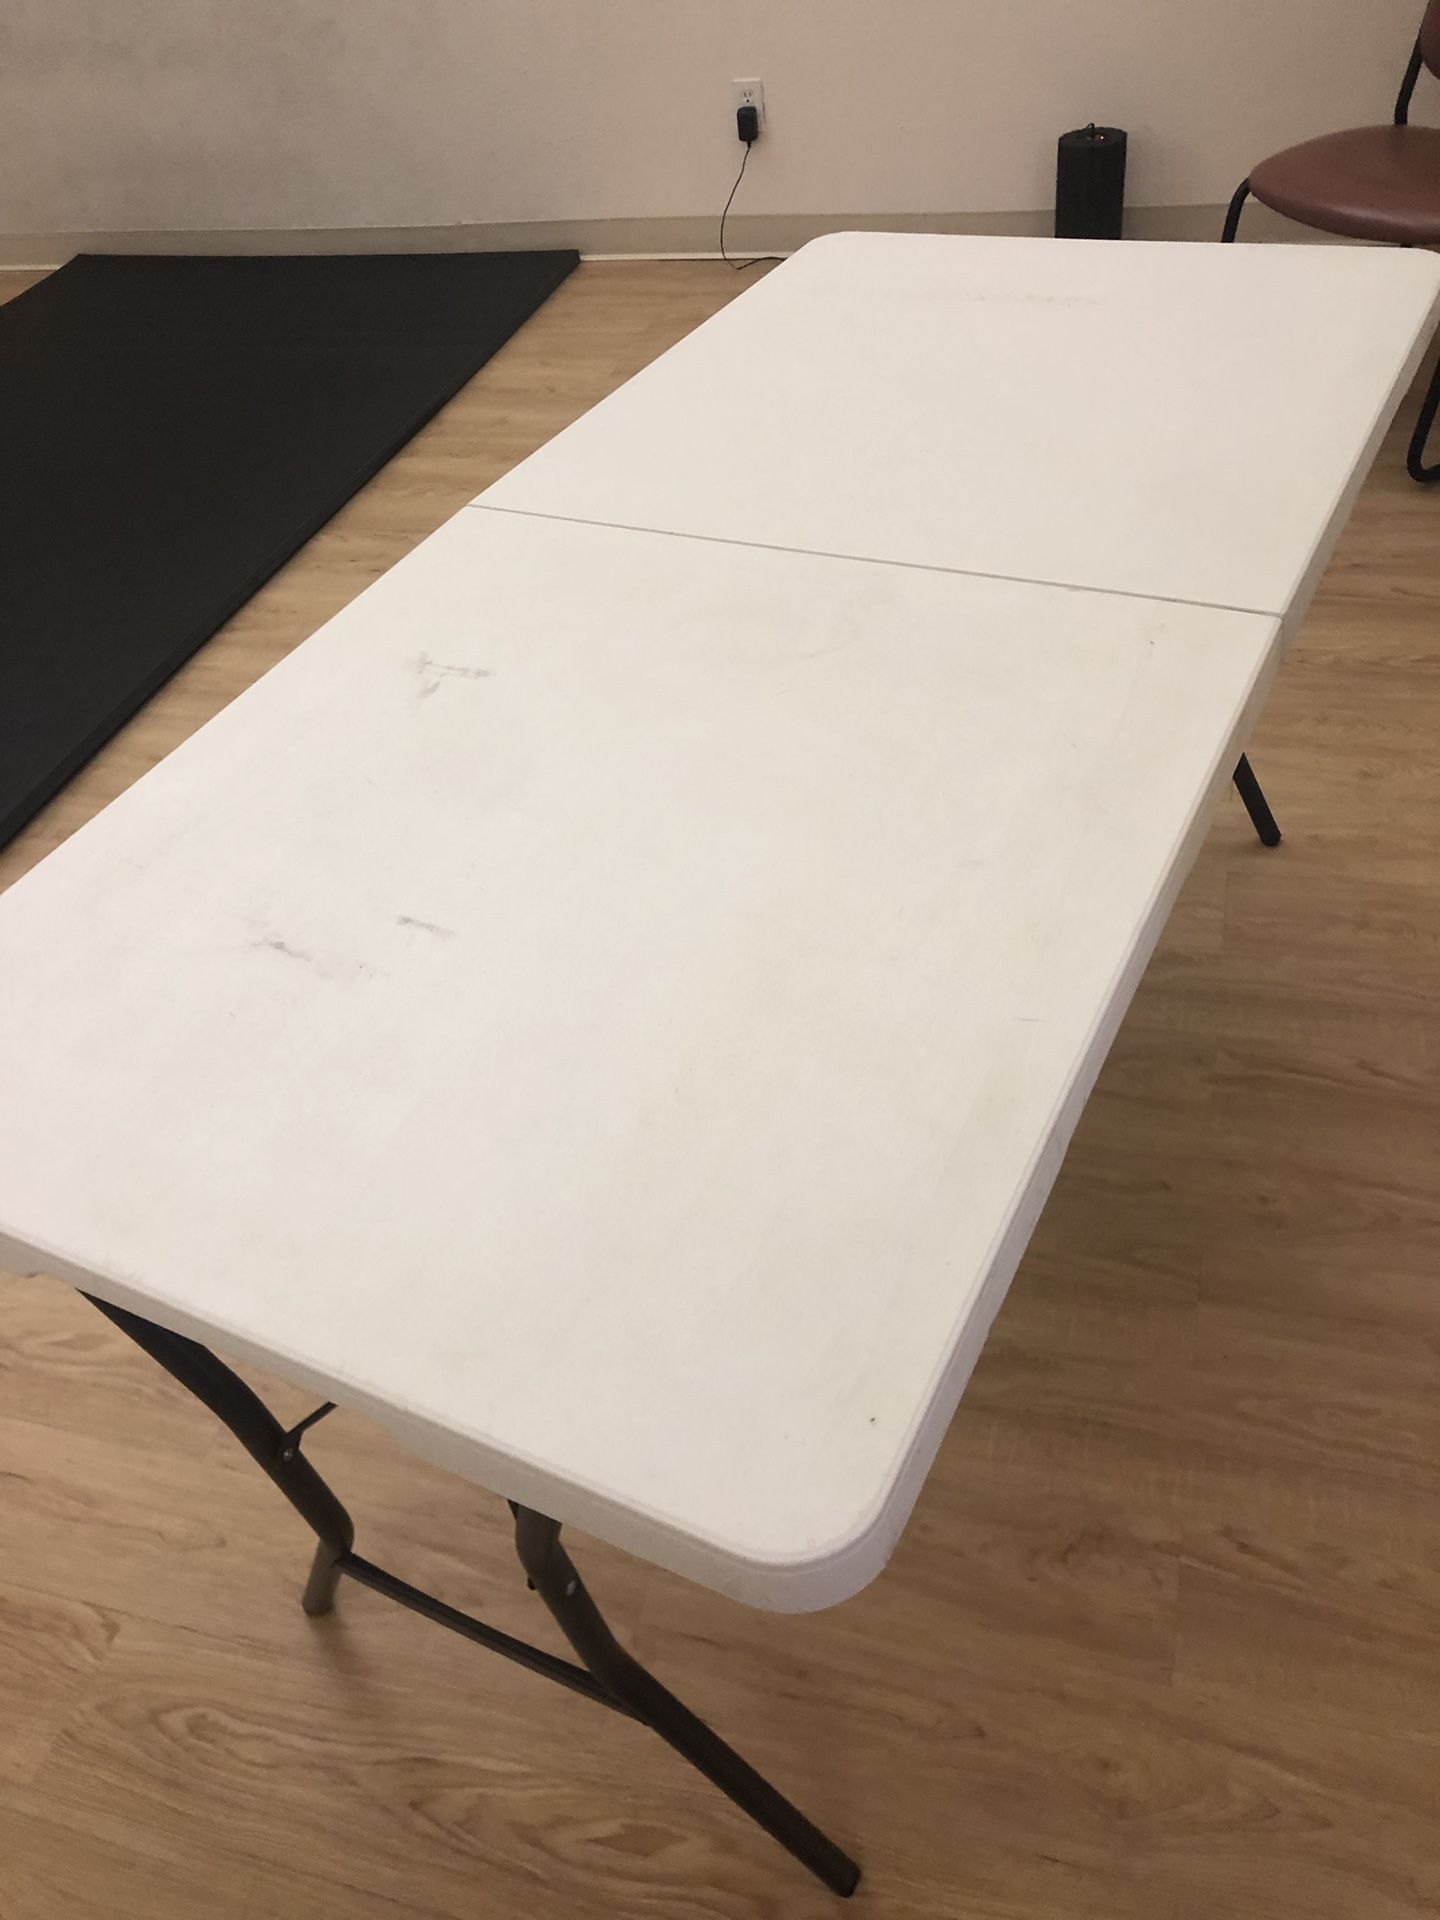 2 pieces of Folding table outdoor.